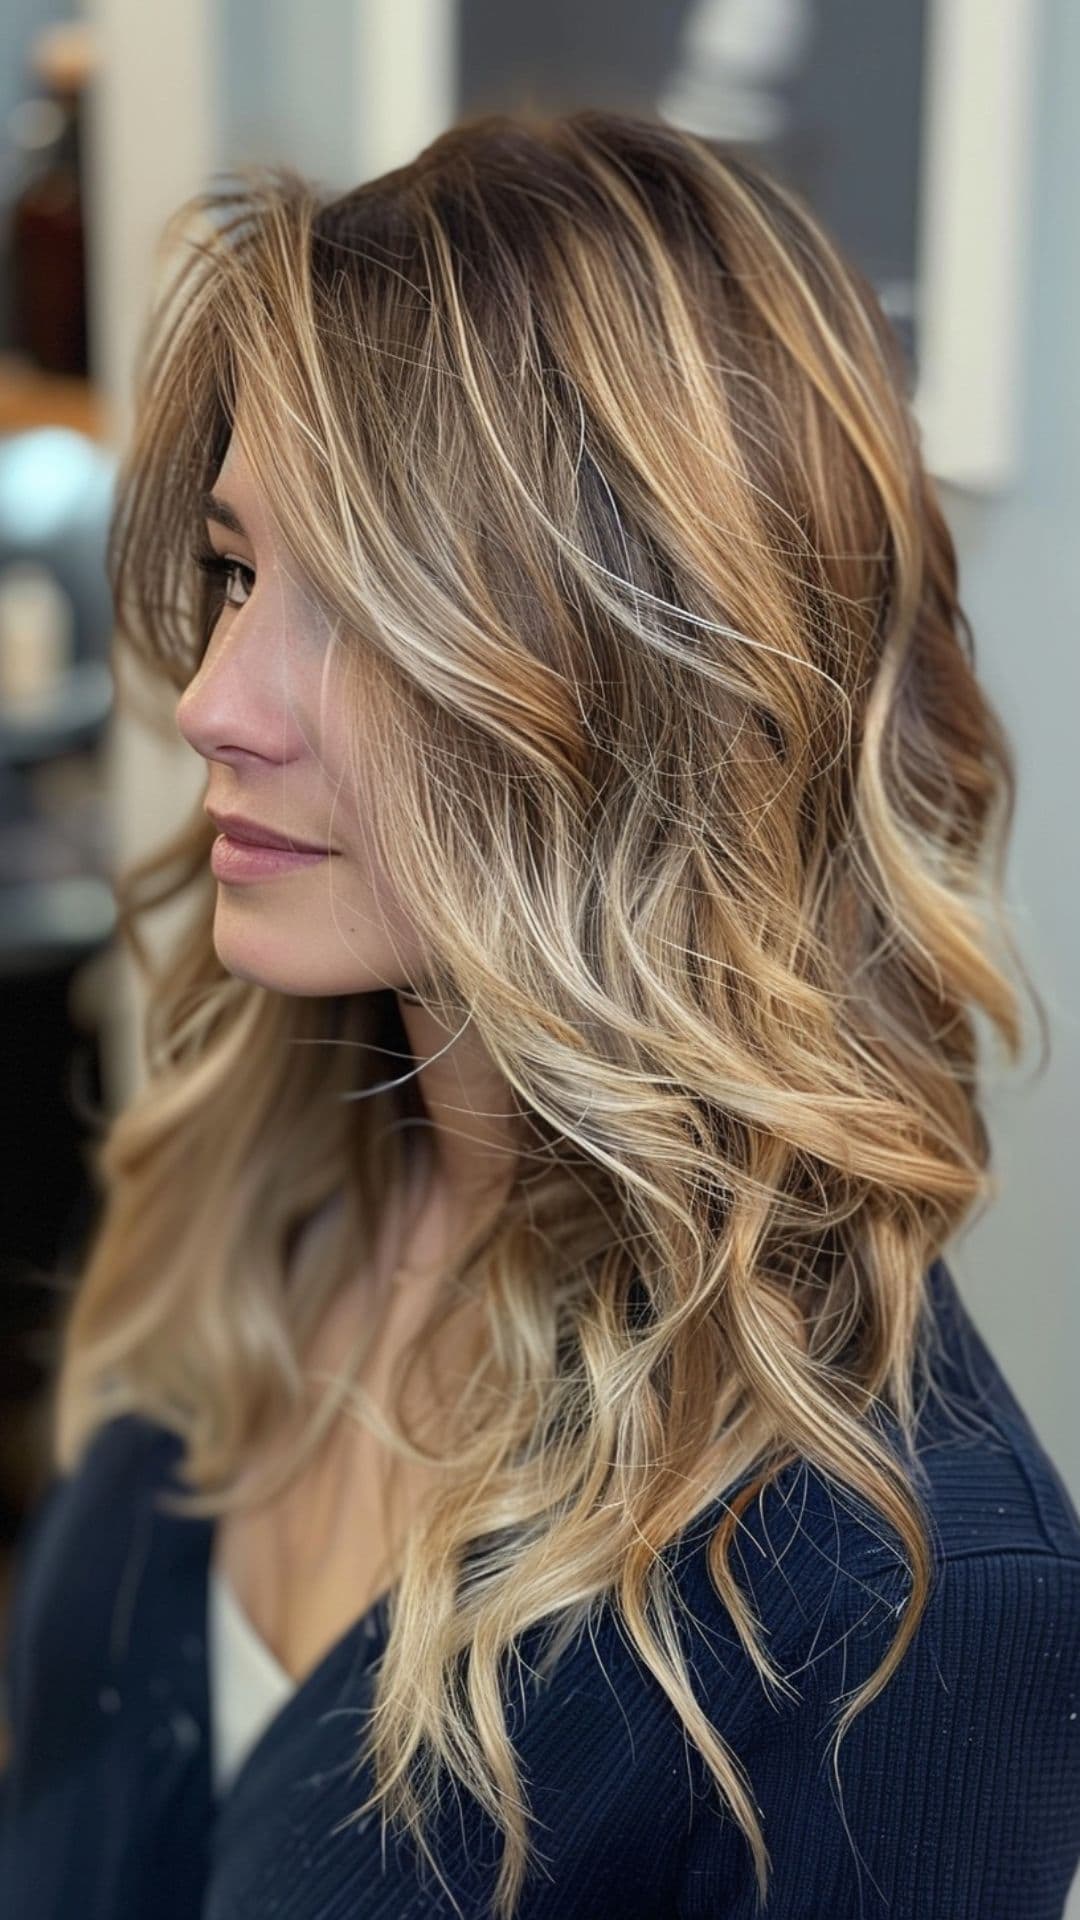 A woman modelling a balayage with soft waves hairstyle.